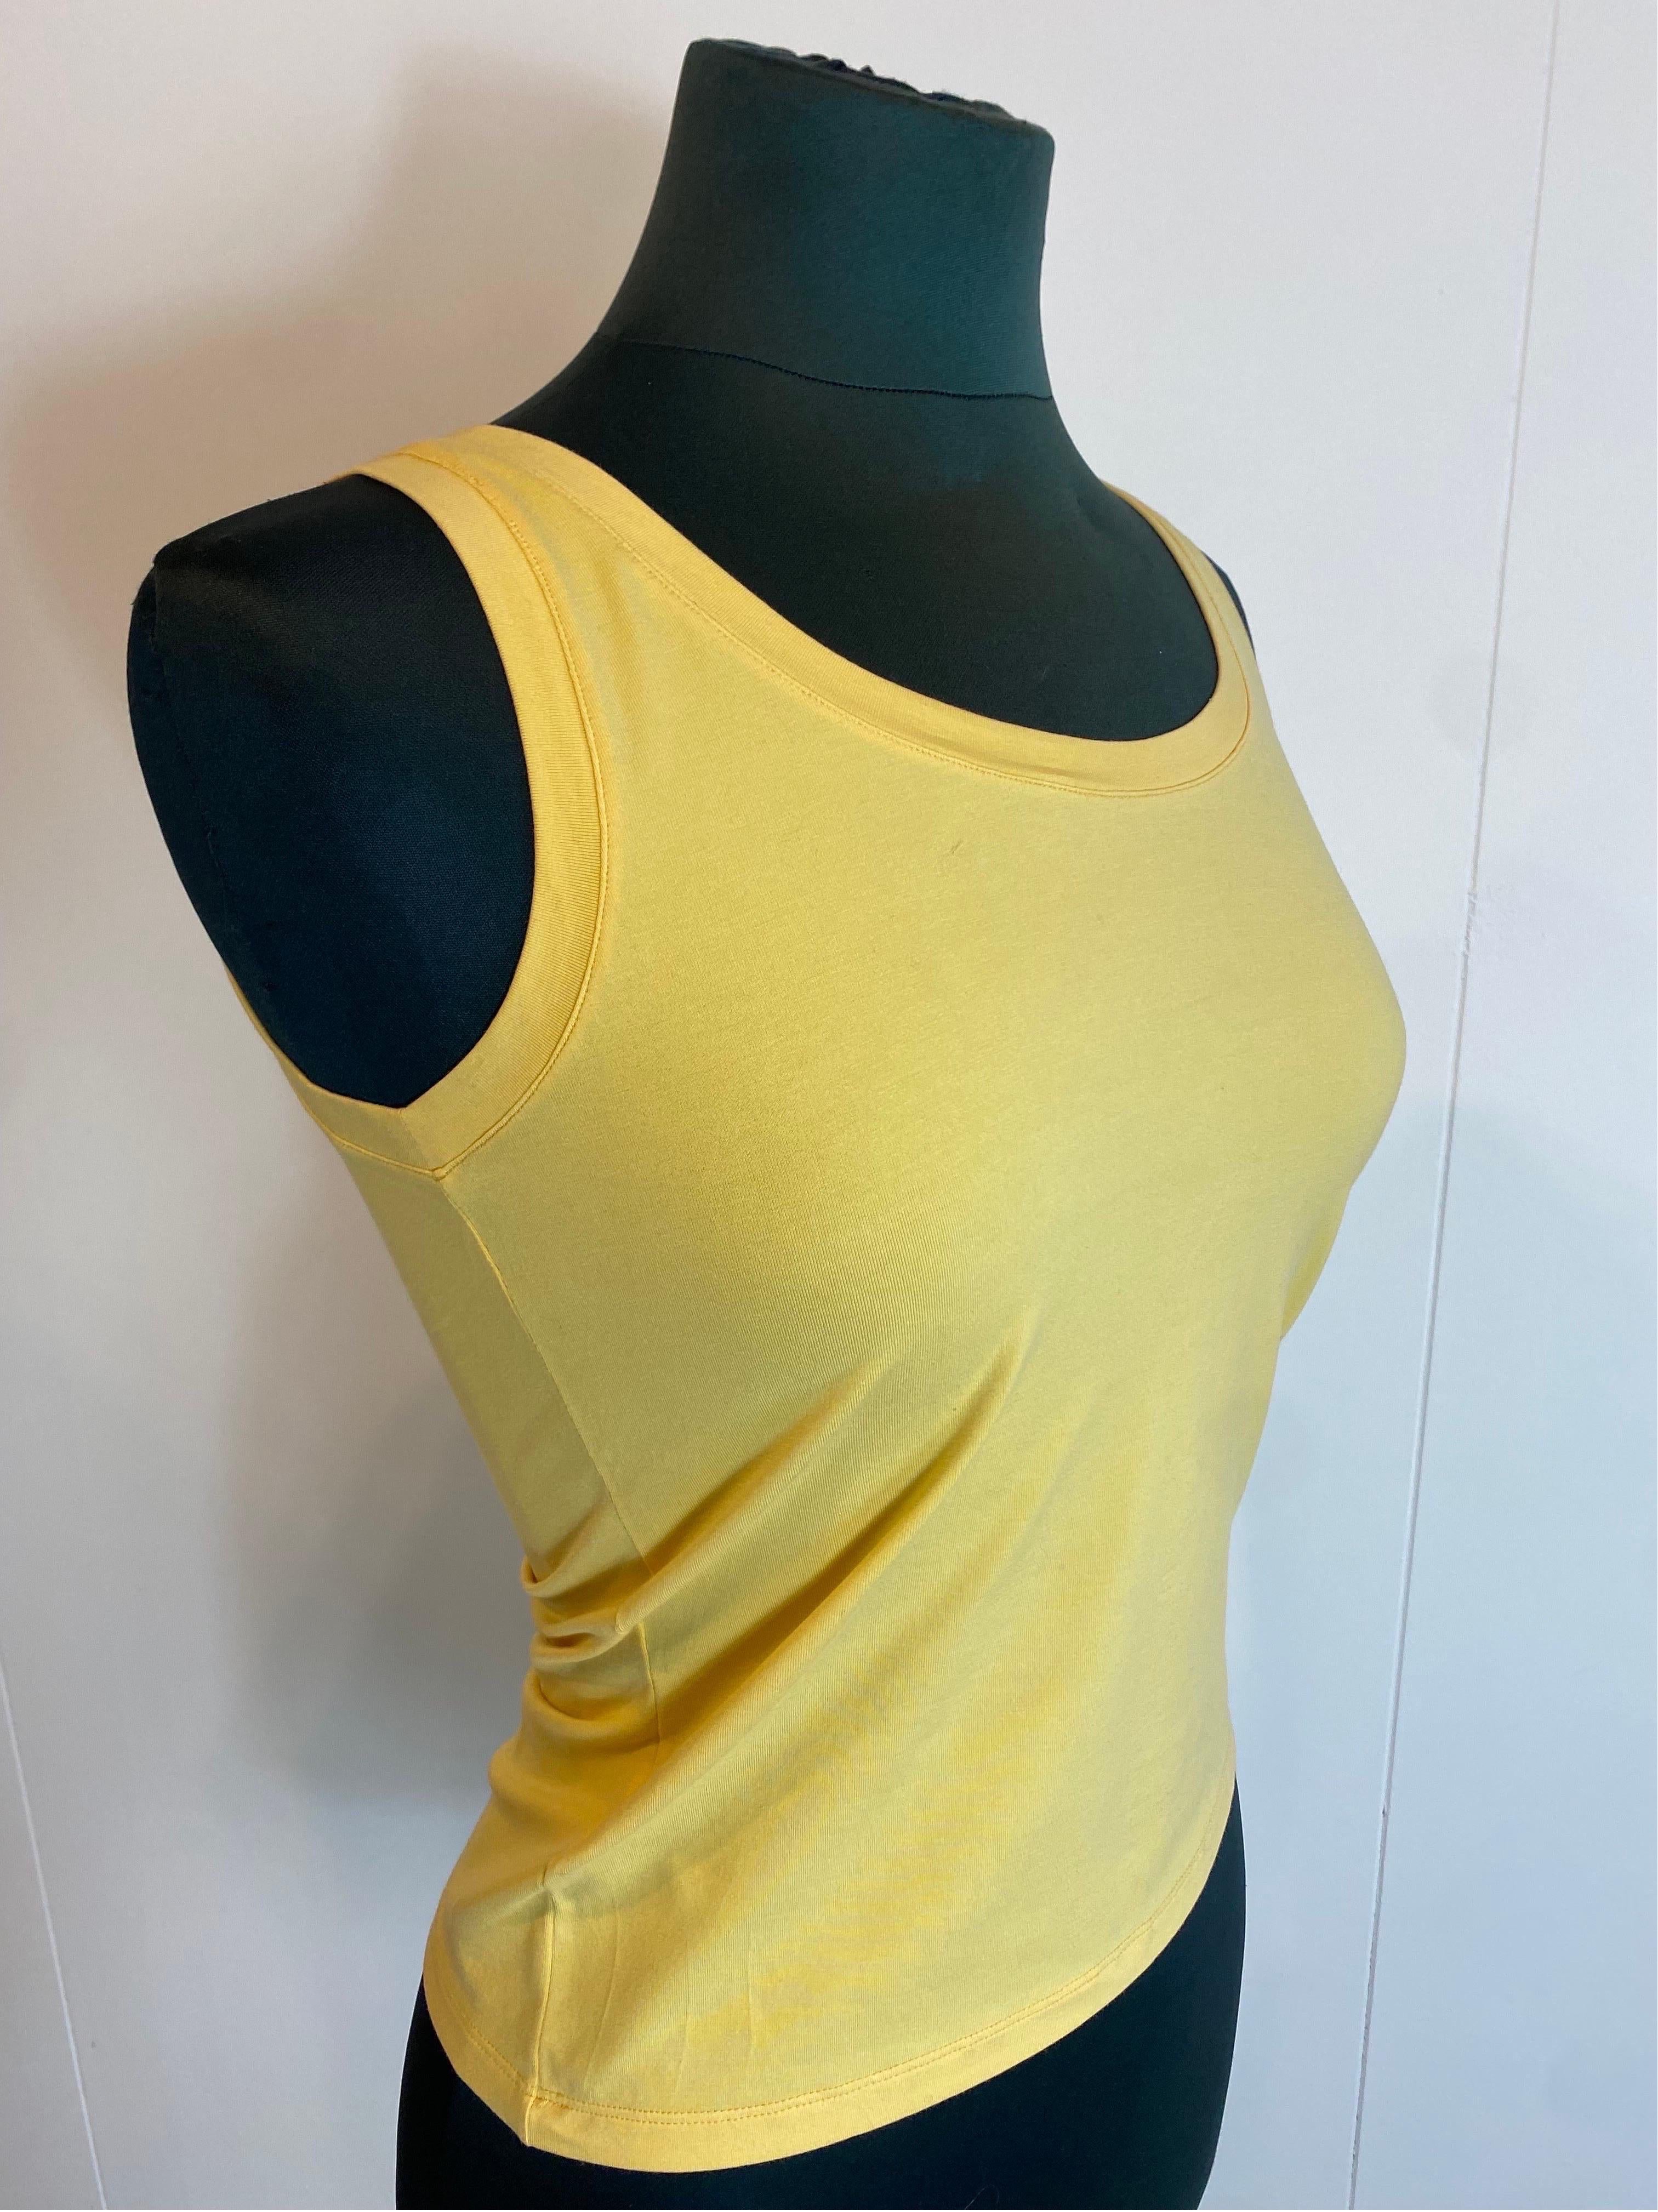 Yellow. Made of cotton and elastane.
Nice fit. International size S.
Length 47
Shoulder pads 28
Bust 39
In addition to being in good condition, it shows signs of normal use.